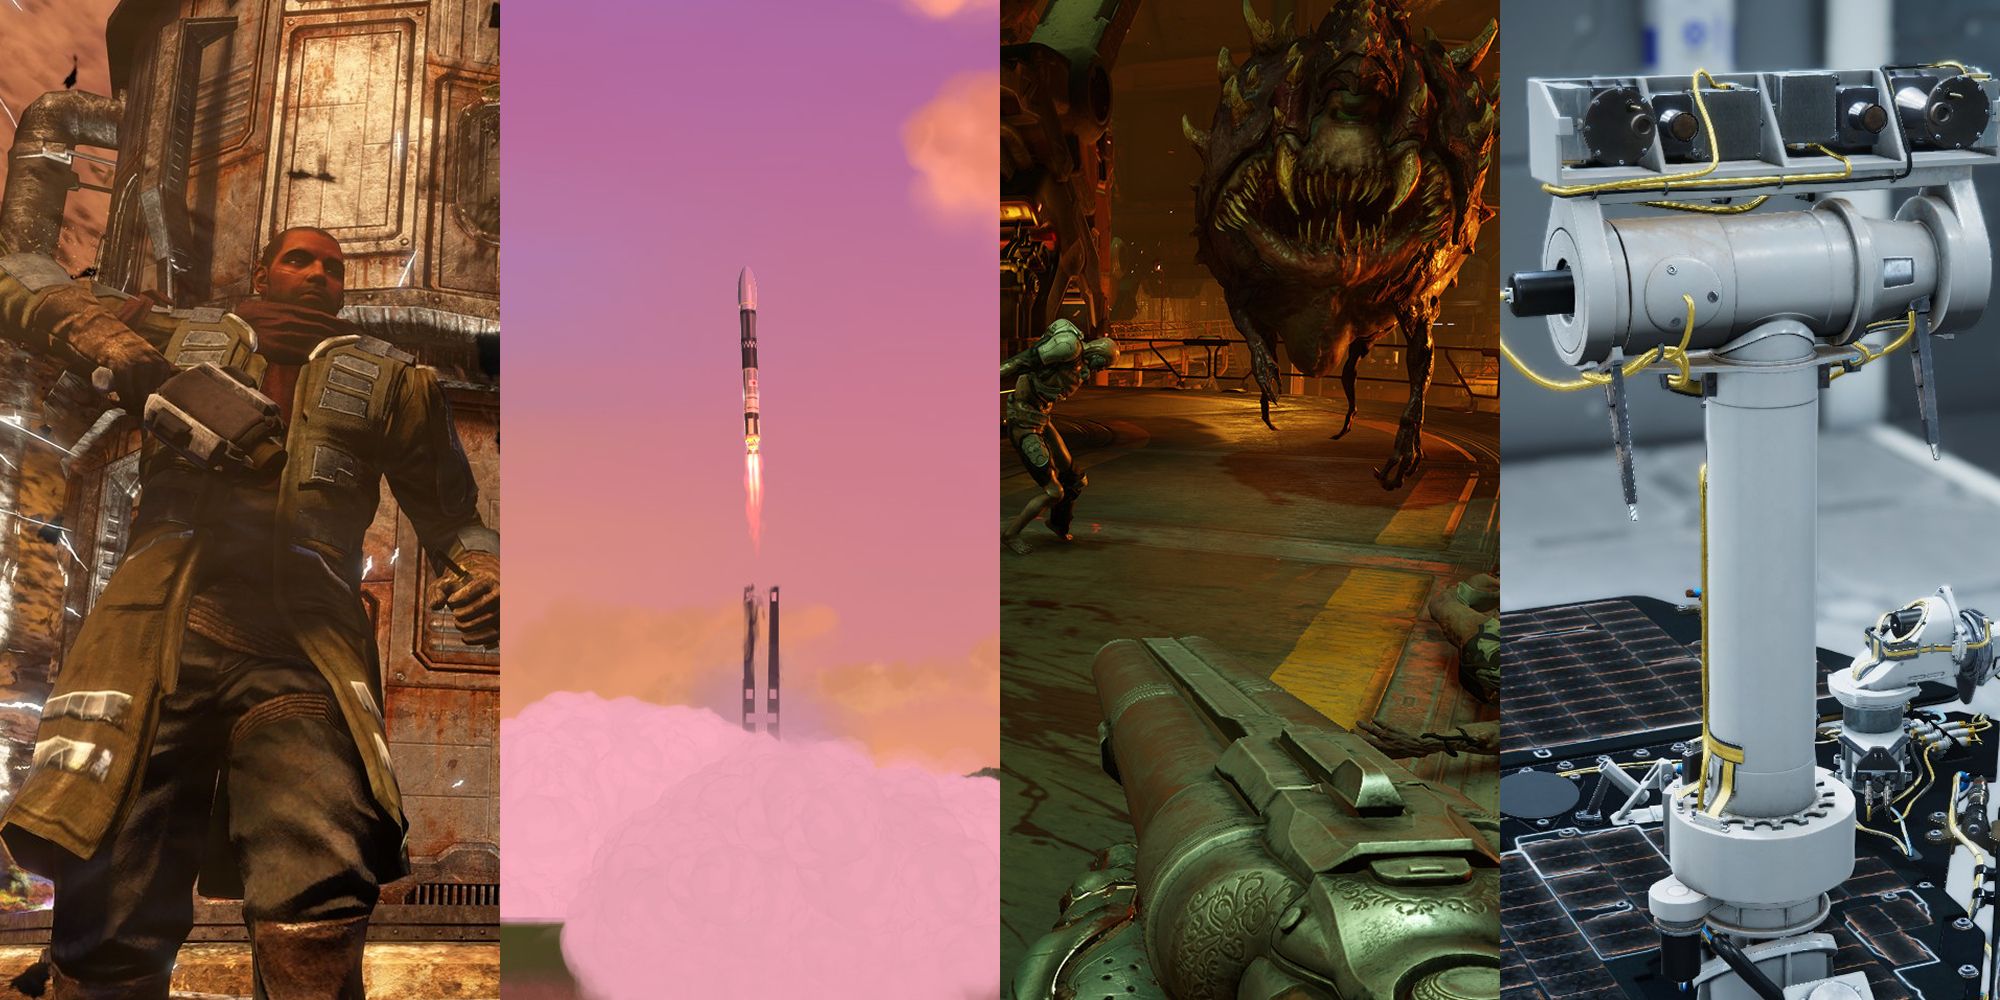 Split image showing scenes from games set on Mars, including Red Faction Guerilla, Mars Horizon, Doom, and Rover Mechanic Simulator